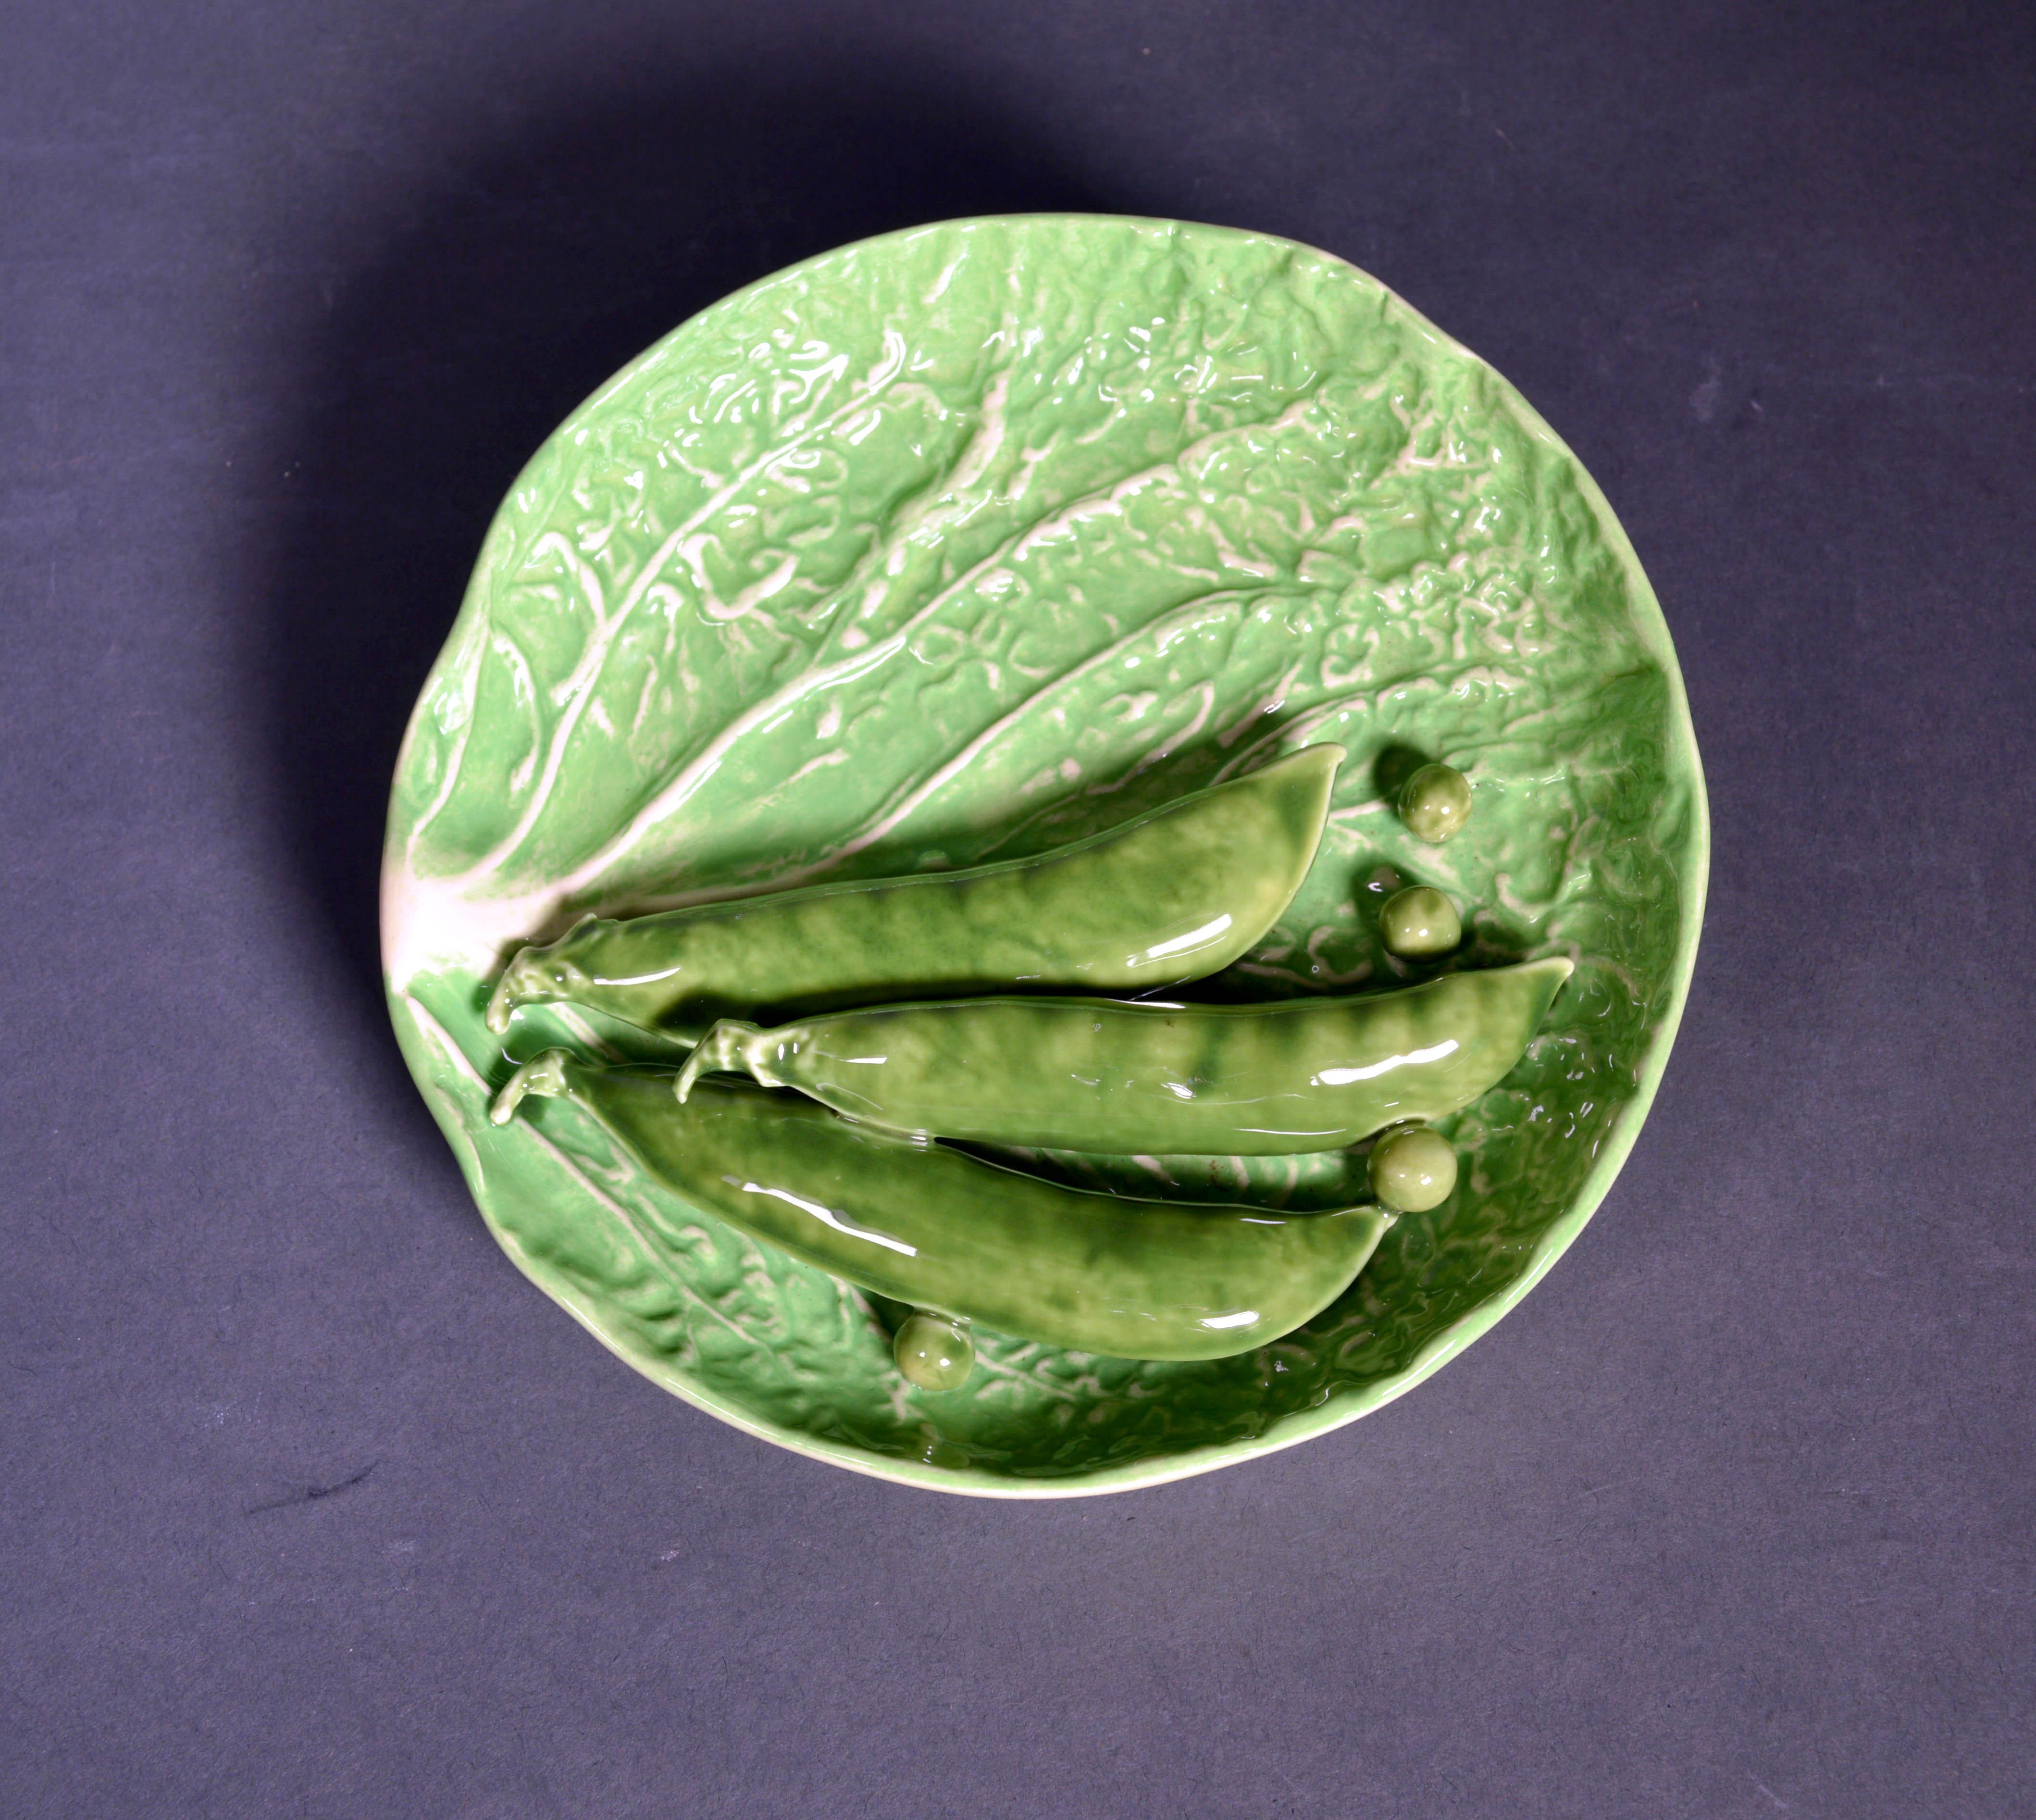 Dodie Thayer lettuce ware peapod dishes,
Set of four,
1970-1980s
  

Each charming Trompe L'oeil circular small dish is in the form of a lettuce leaf with a grouping of three peapods and several loose peas applied to the surface.

Dimensions: